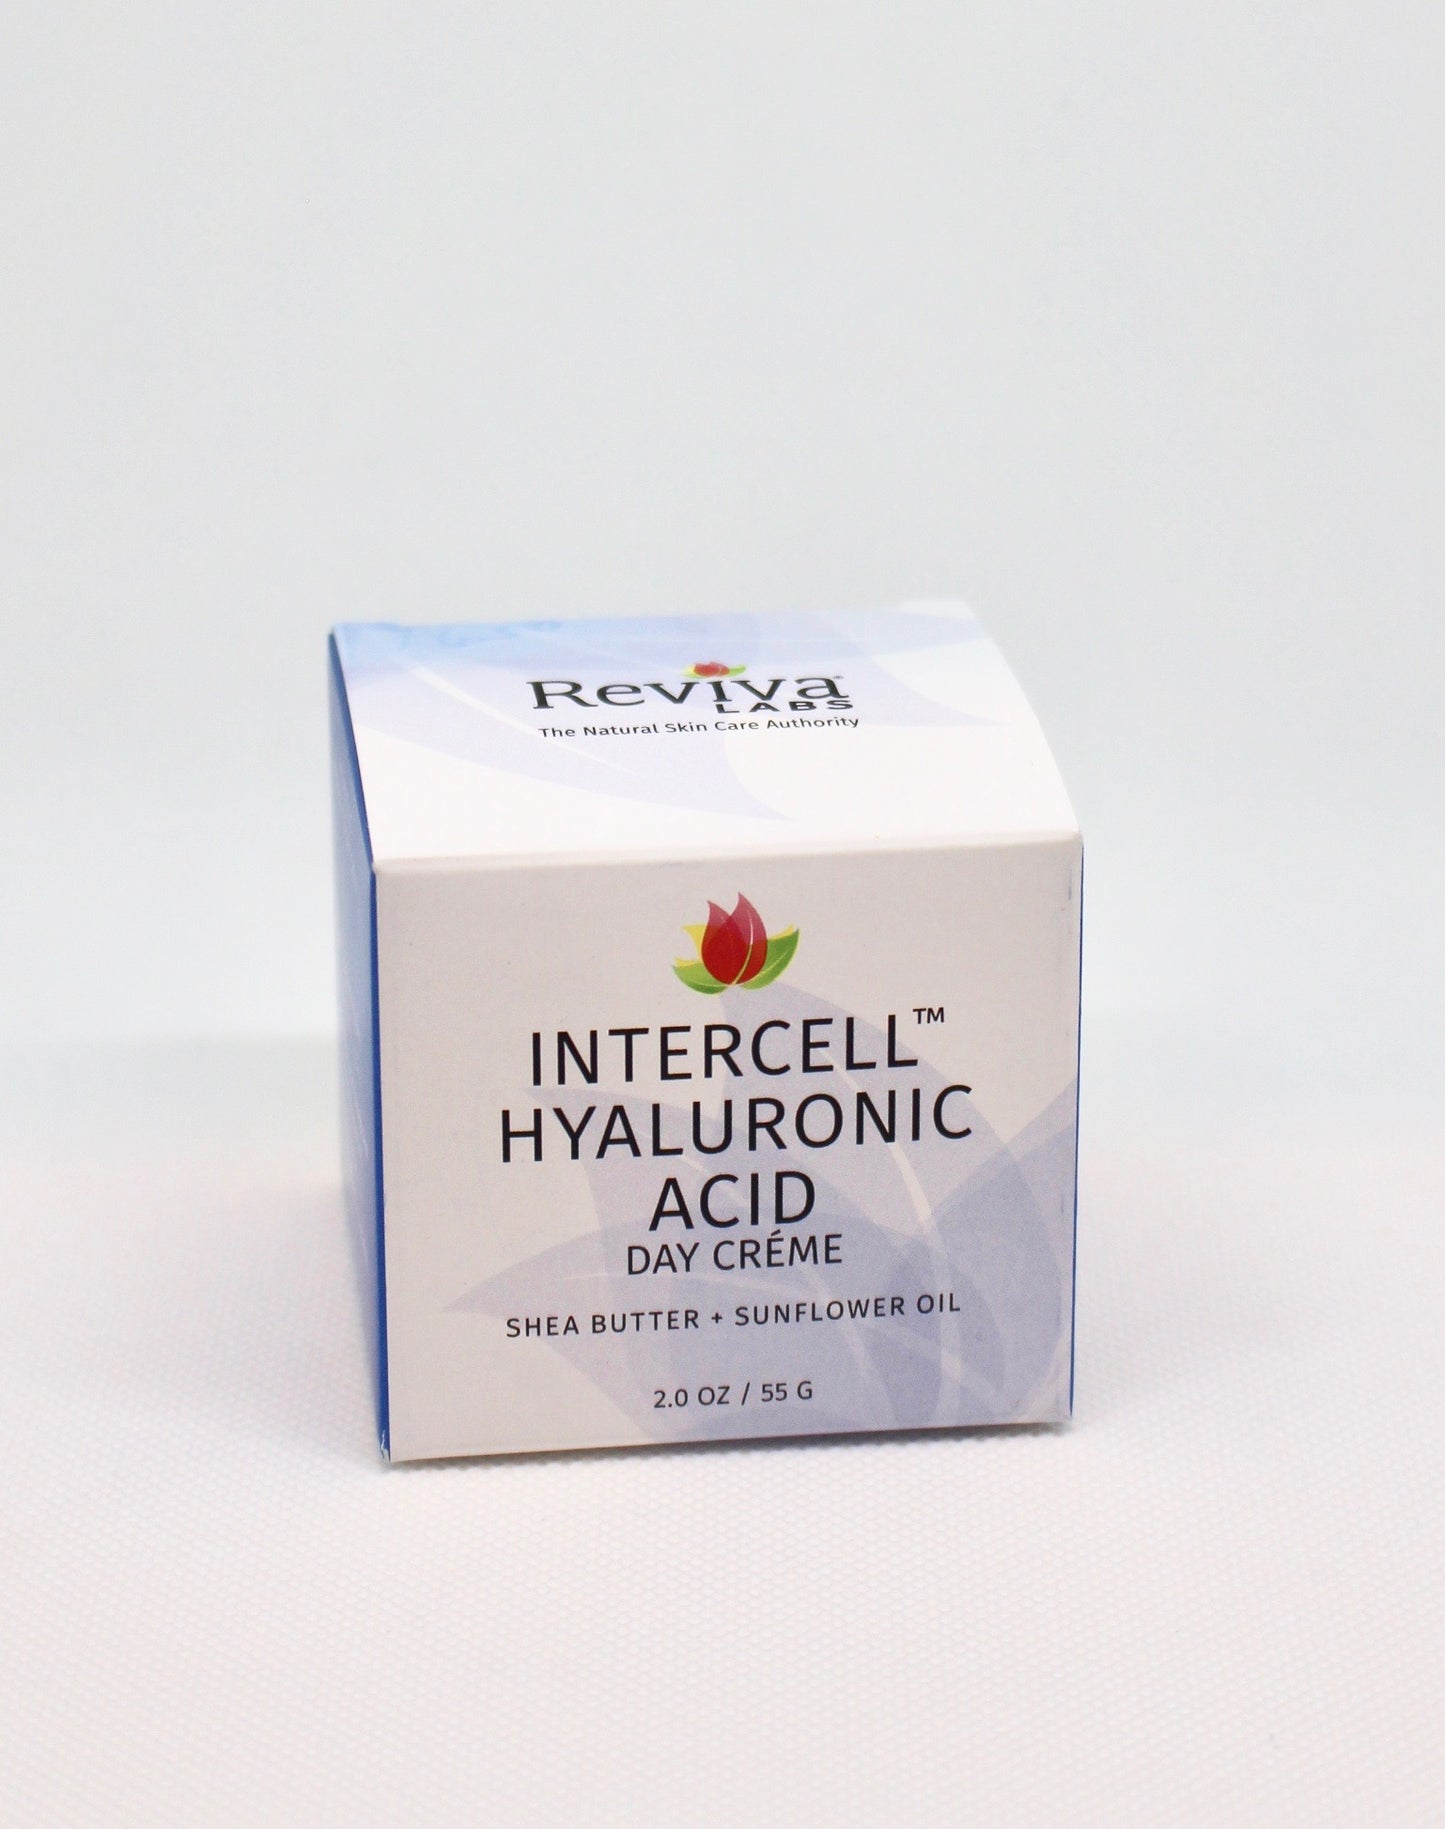 Intercell Hyaluronic Acid Day Creme